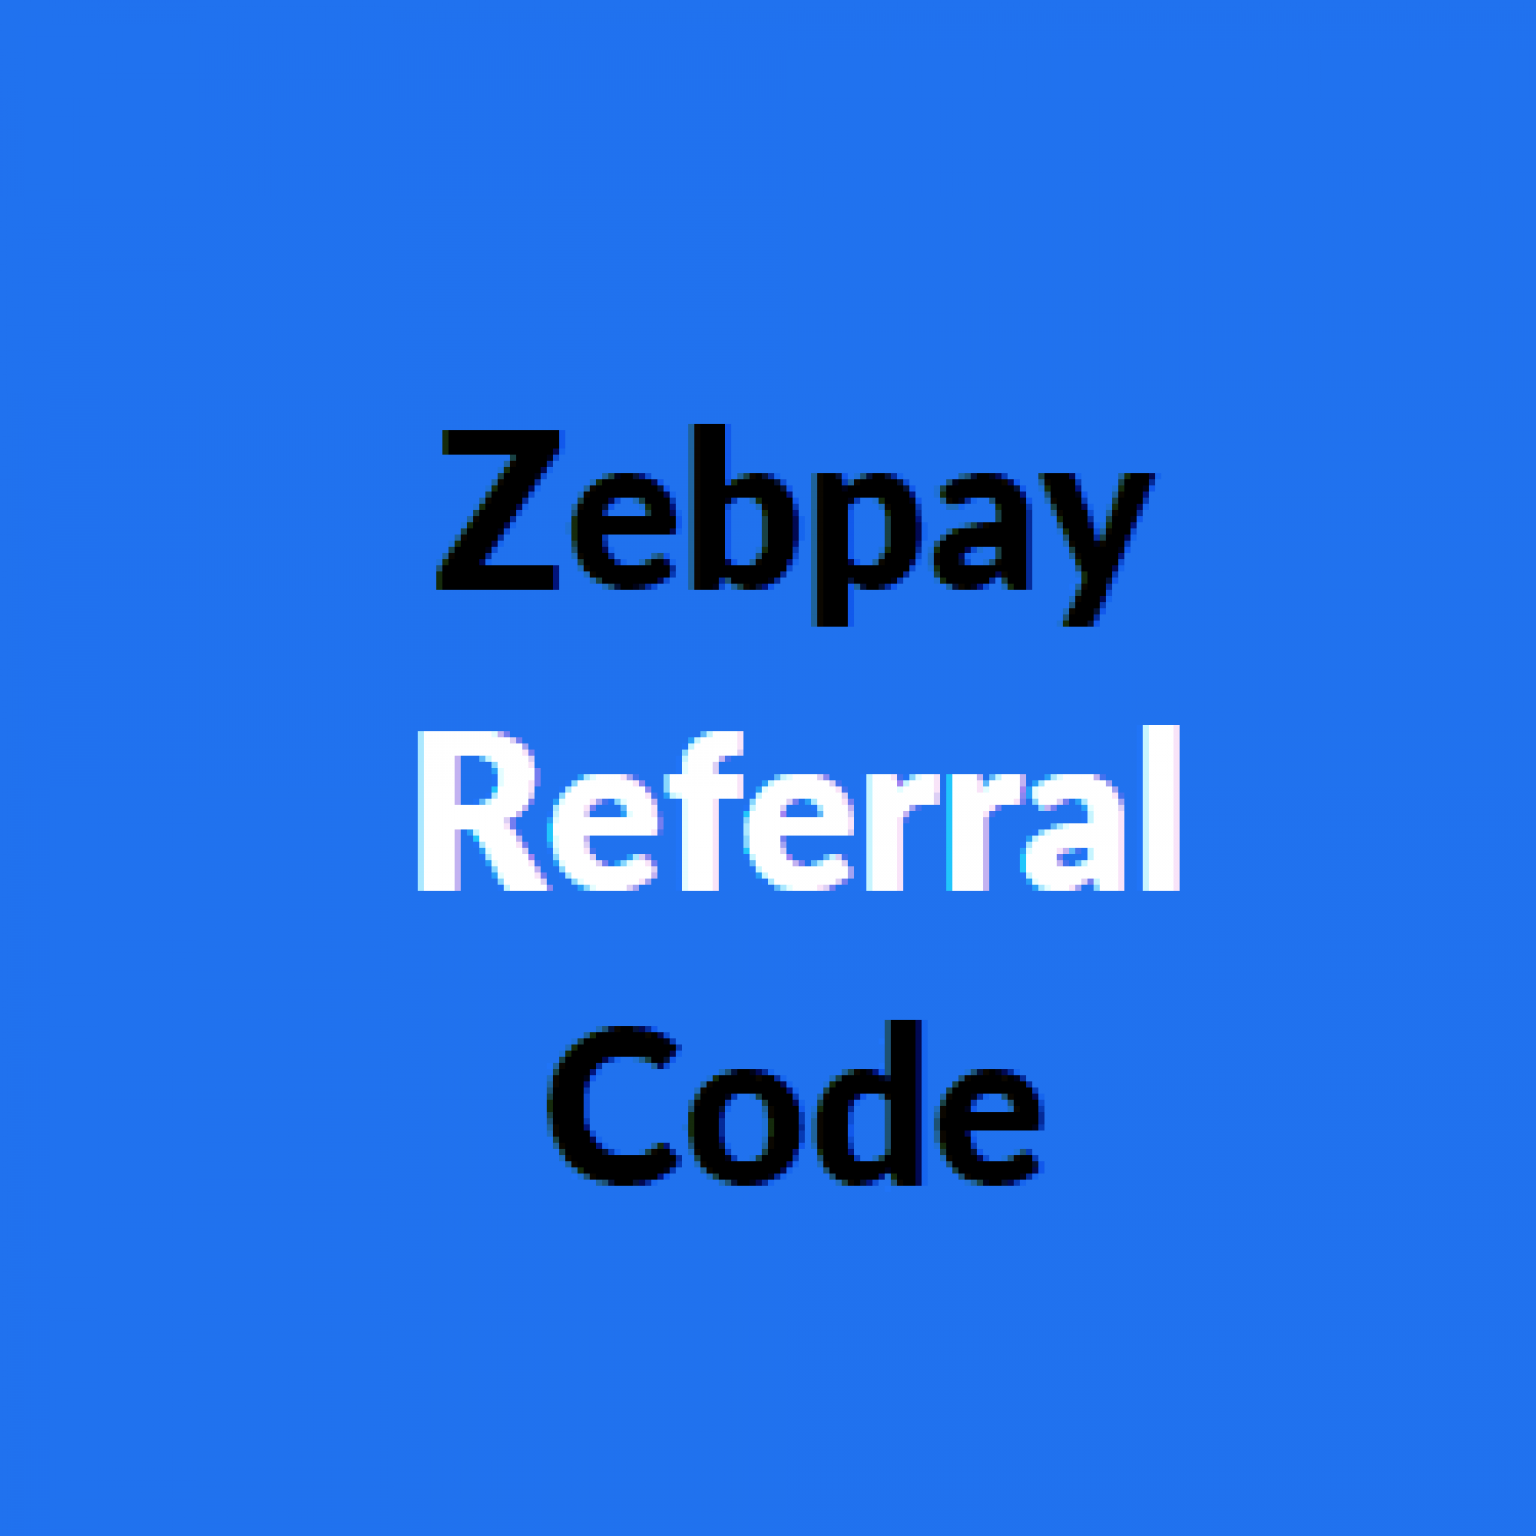 Zebpay Referral Code [2021]: Get 15$ dollar Credit Quickly